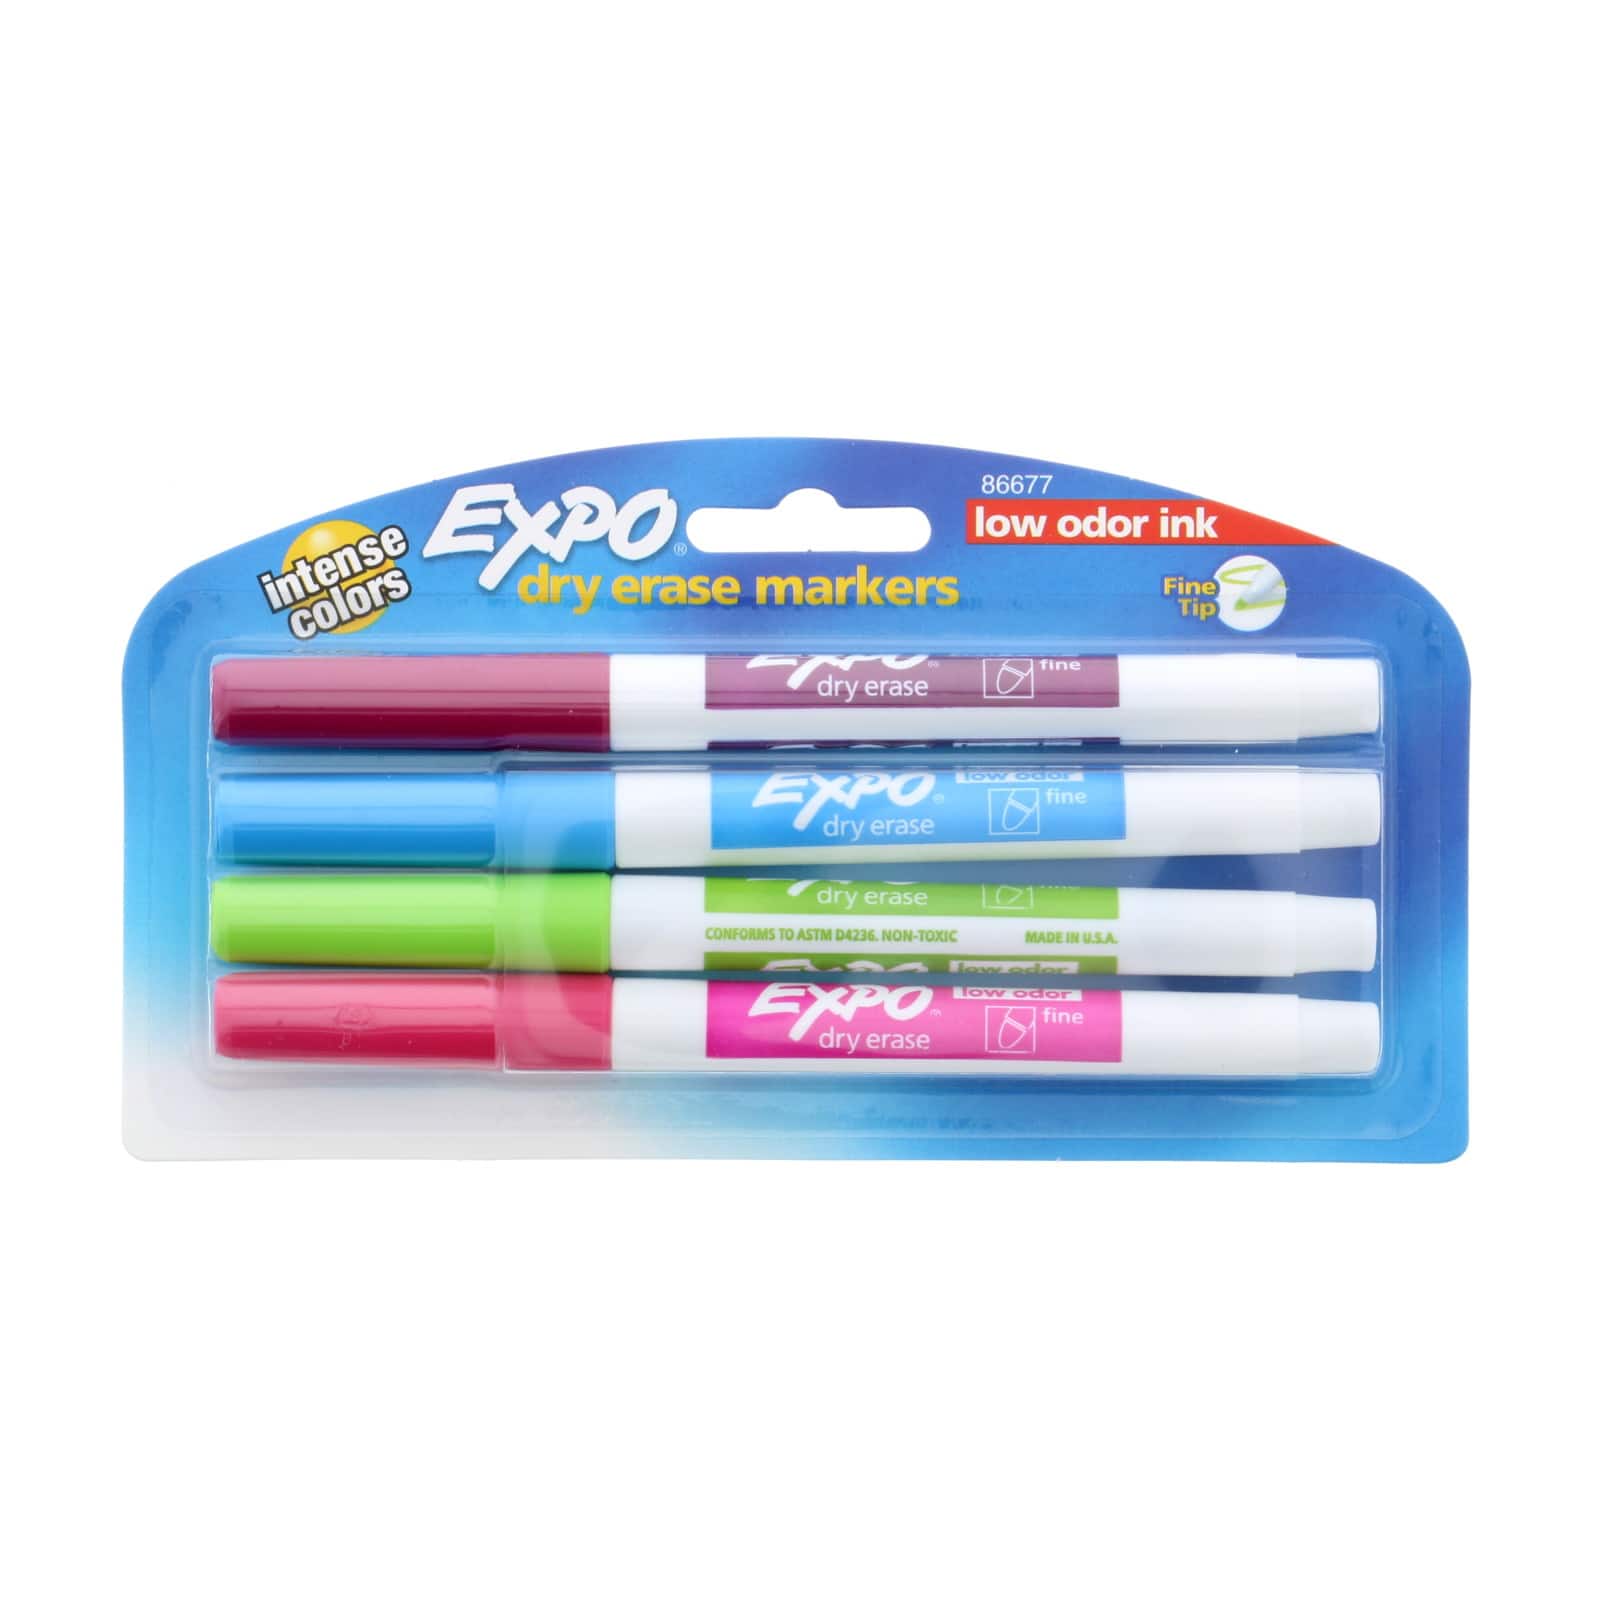  Expo Neon Color Dry Erase Markers 5 pk Neon Bullet Tip